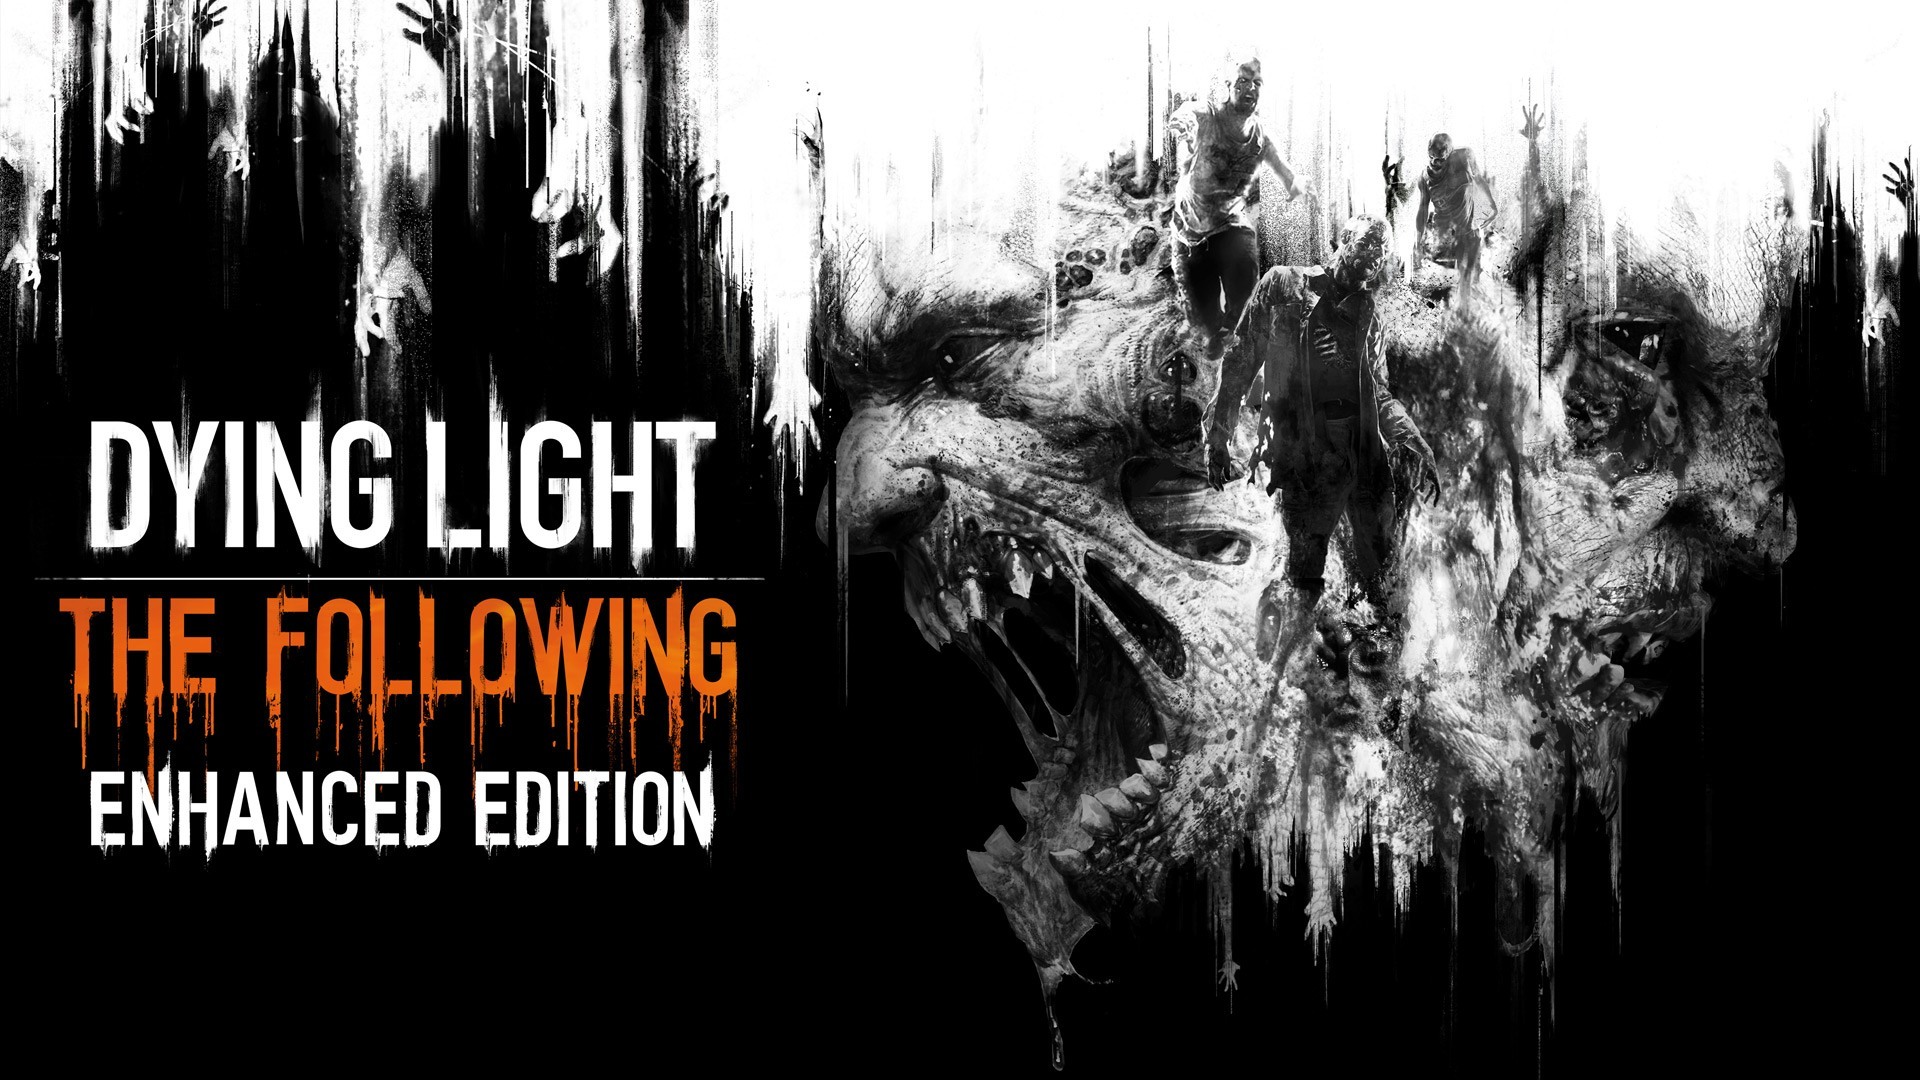 Dying Light The Following Enhanced Edition - HD Wallpaper 